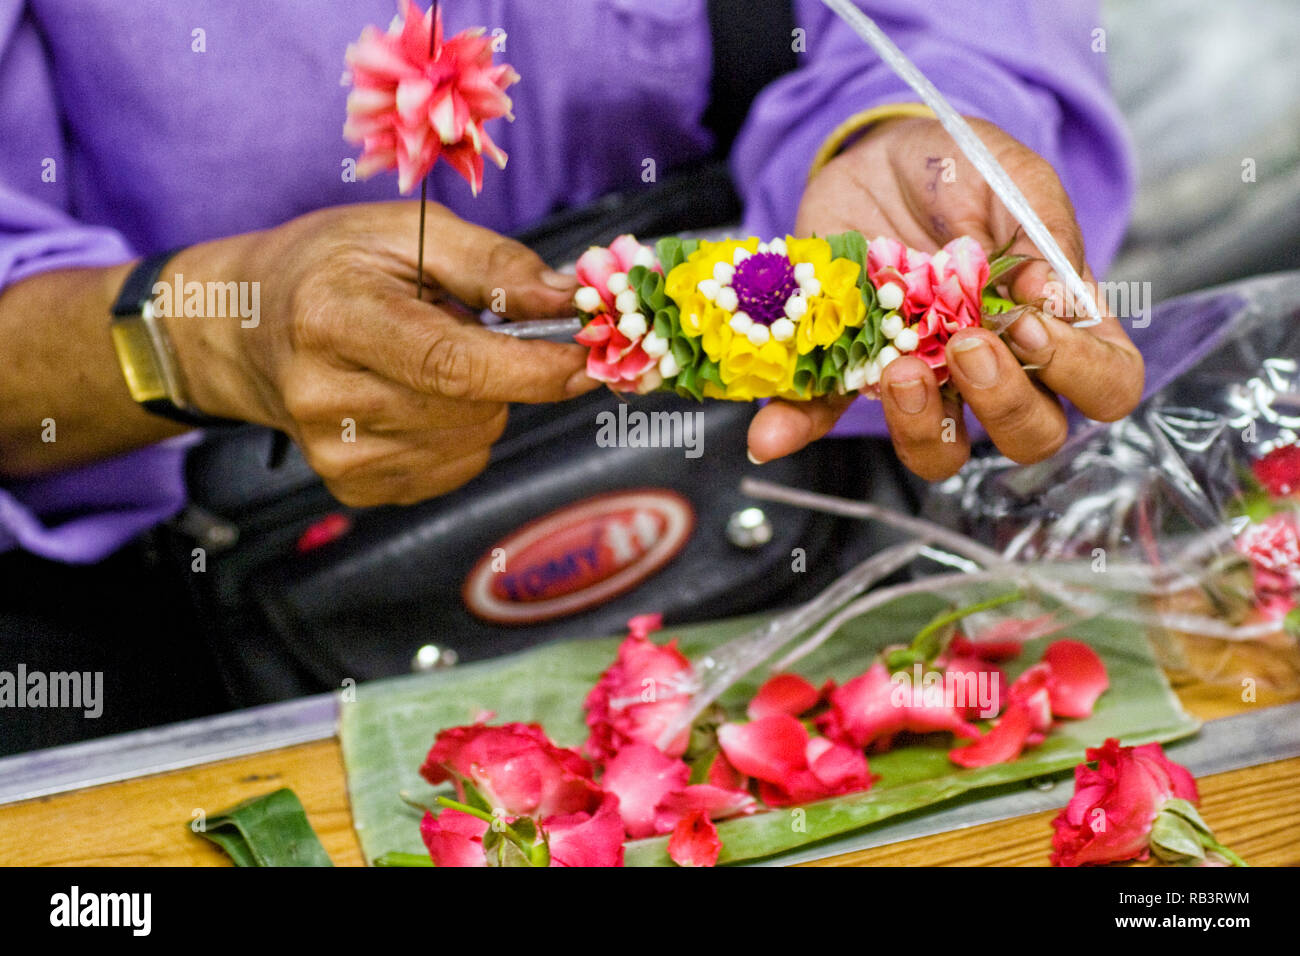 arranging flowers for a phuang malai floral garland at the Pak Khlong Talat flower market in Bangkok, Thailand Stock Photo